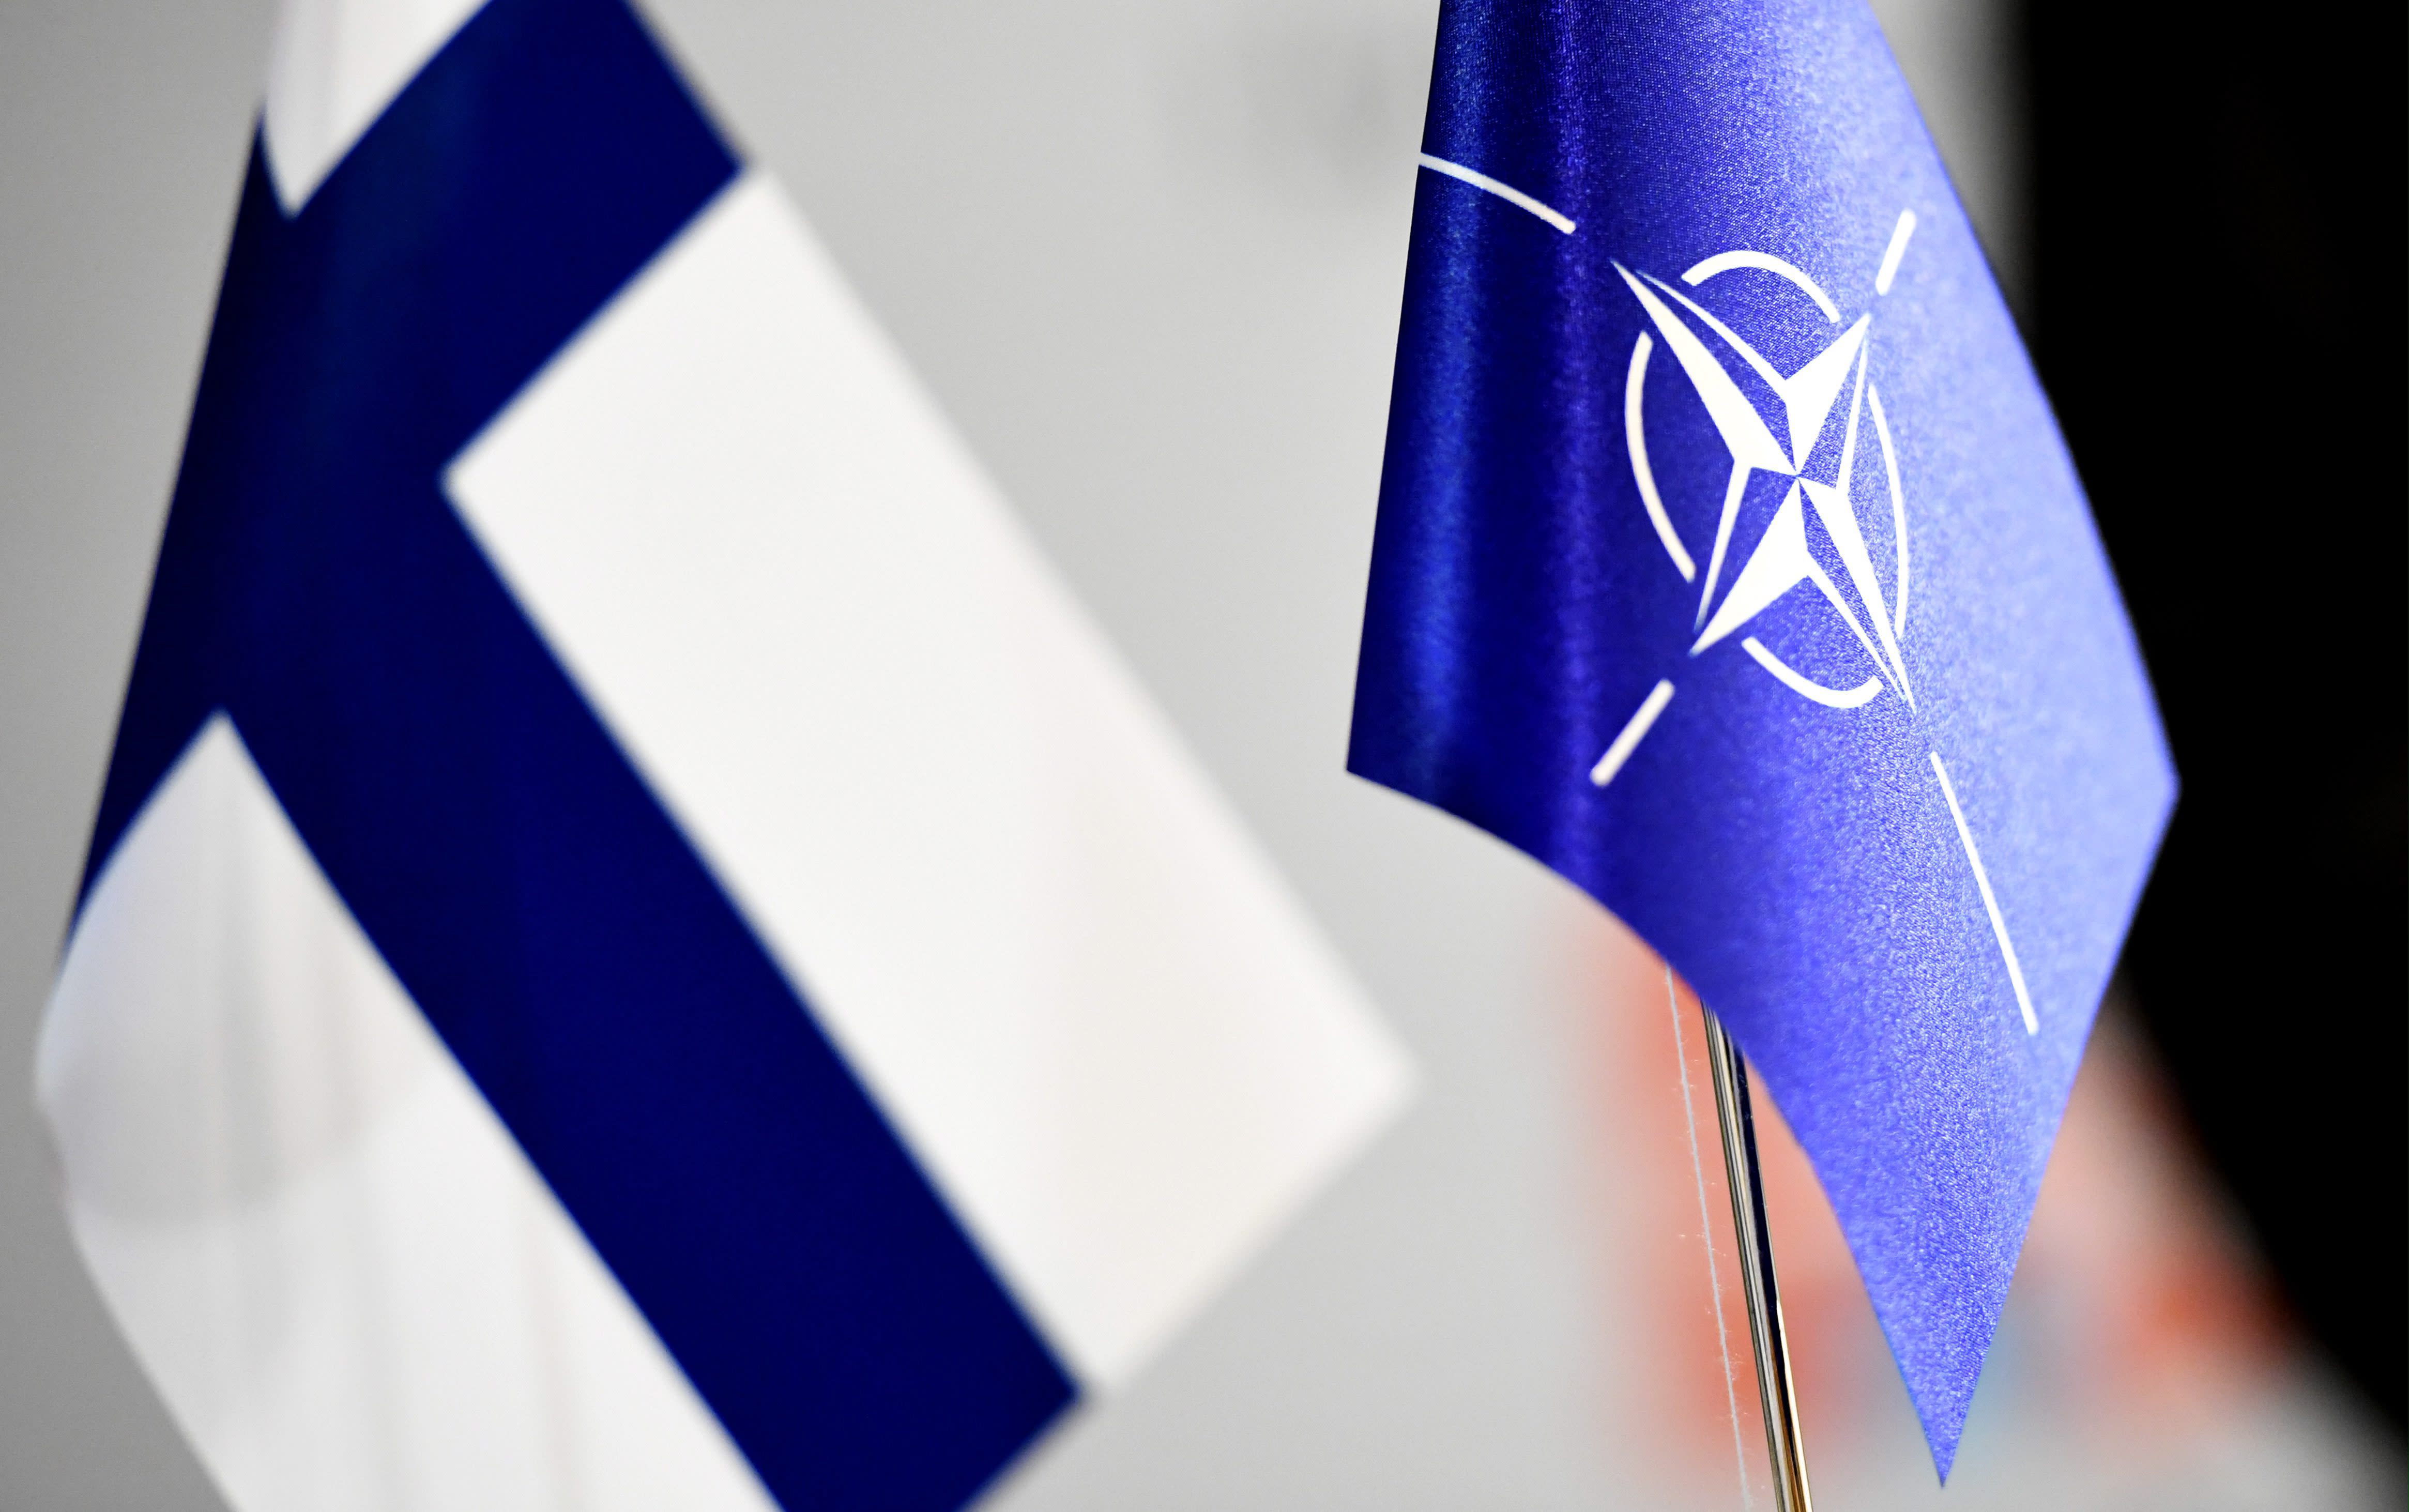 Government report: The accession of Finland and Sweden to NATO would increase security in the Baltic Sea region